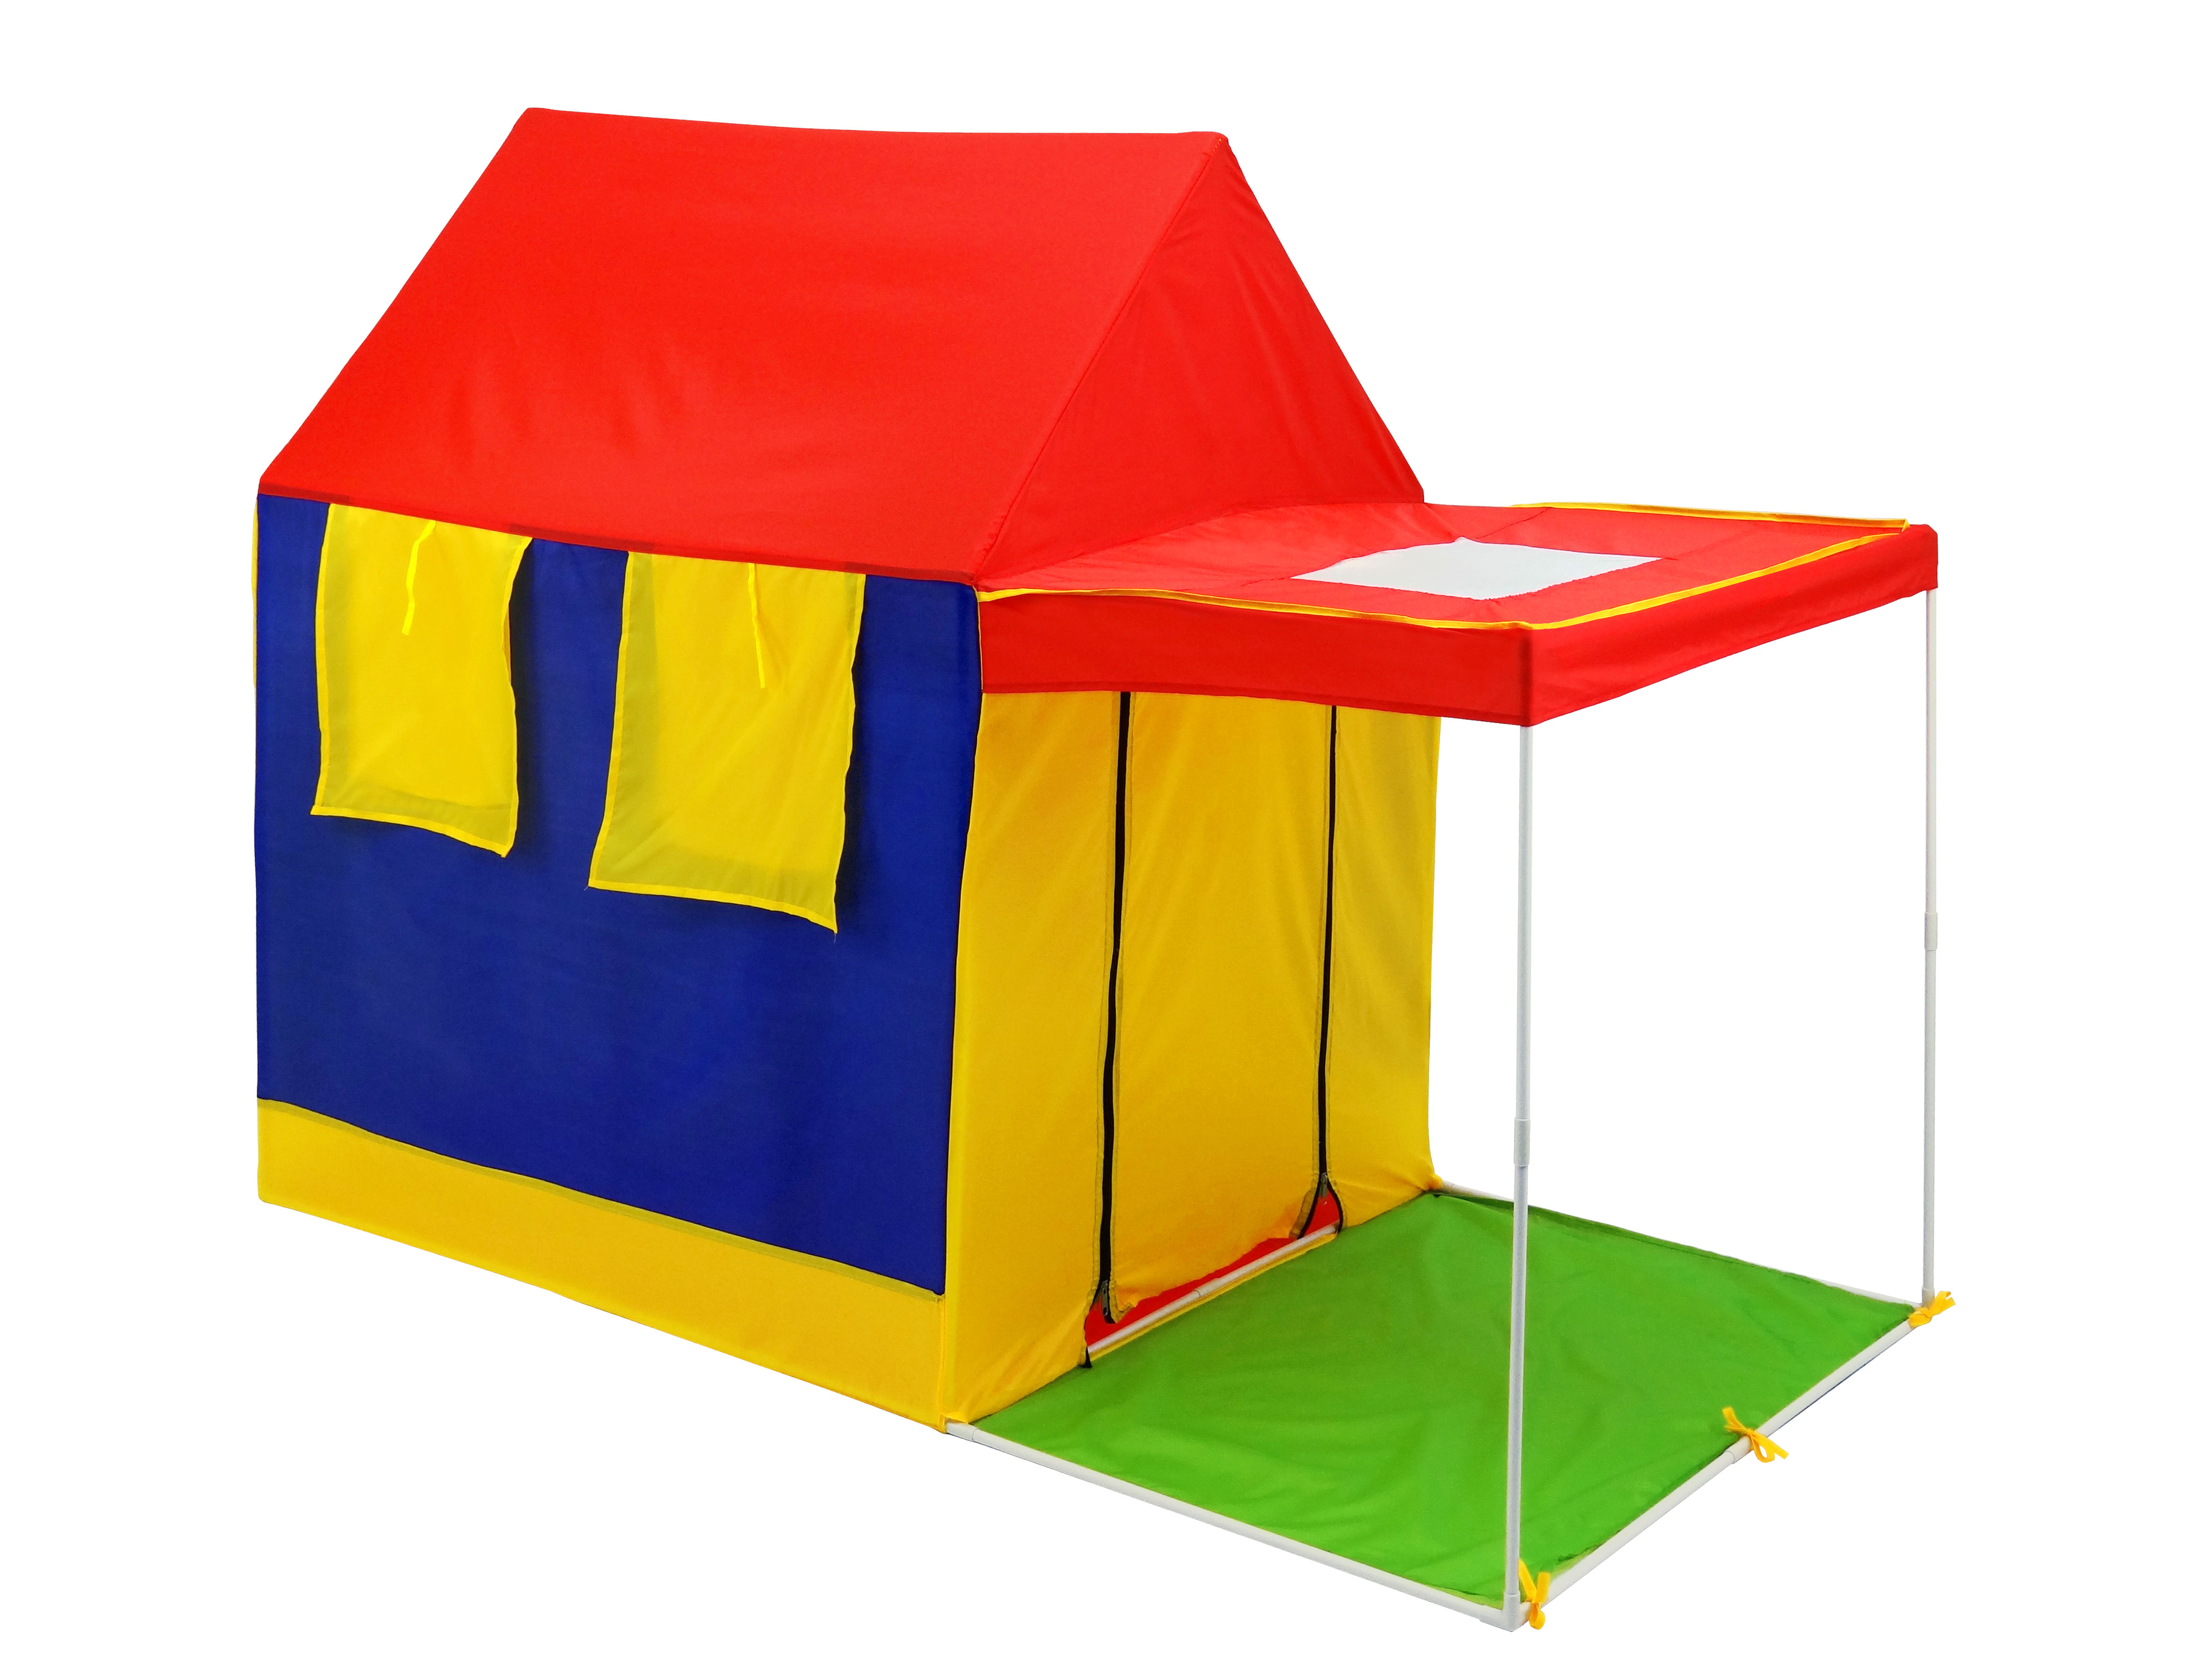 GigaTent Summer House 4 Large Windows With Skylight & Porch Shade Polyester Play Tent, Multi-color - image 1 of 2